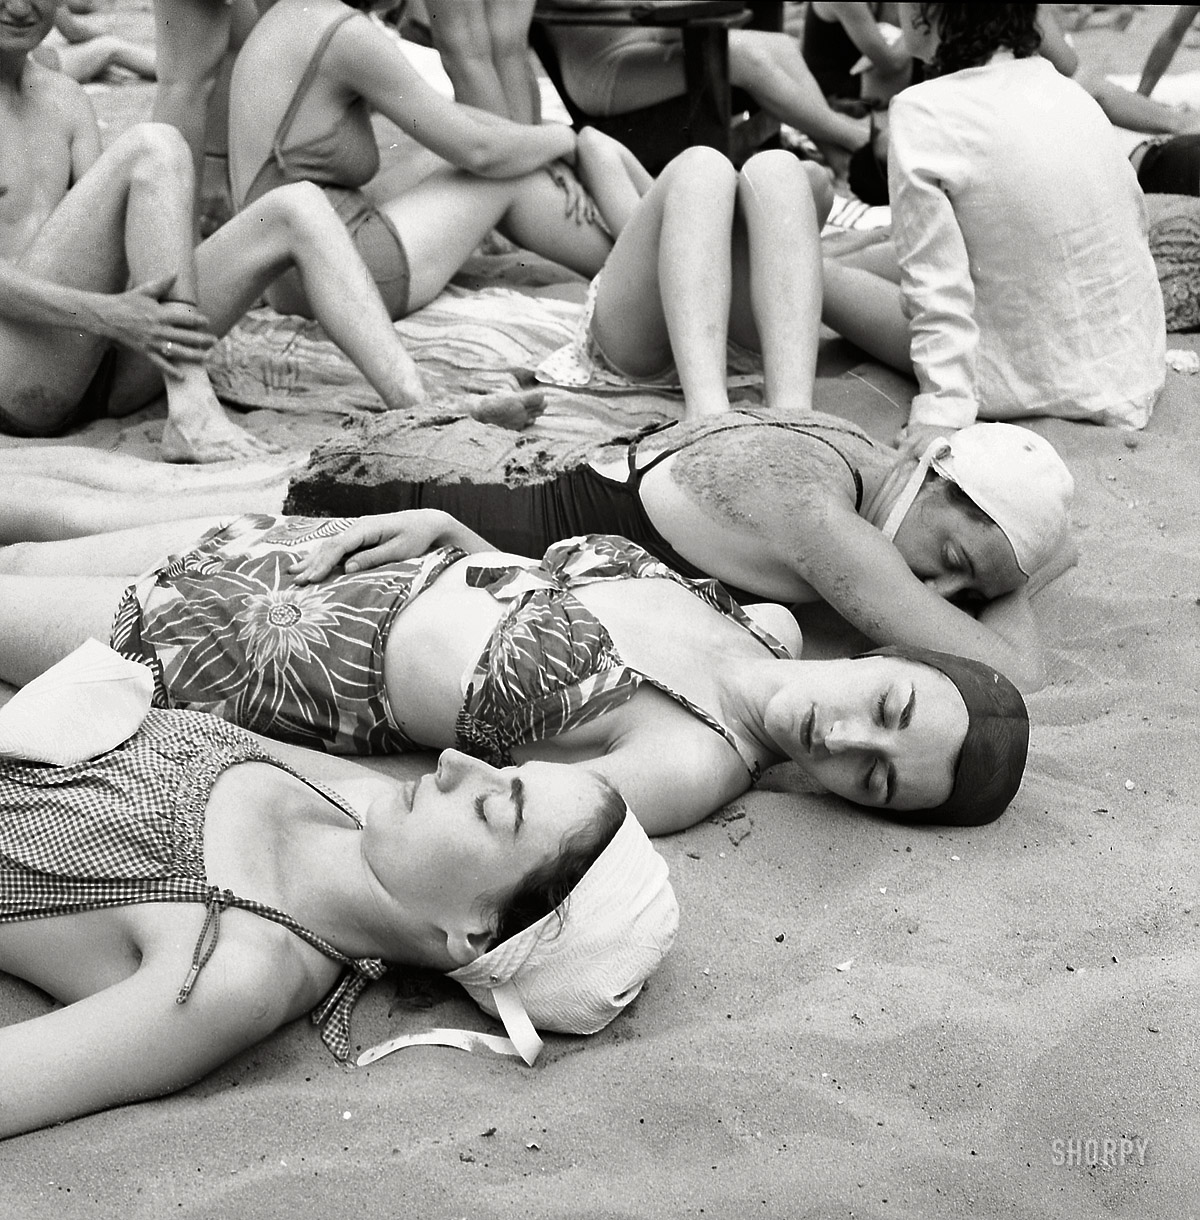 July 1943. Glen Echo, Maryland. "Sun bathers on the sand beach at the swimming pool in the Glen Echo amusement park." In the foreground: The photographer's sisters Claire and Enid Bubley. Photo by Esther Bubley, OWI. View full size.